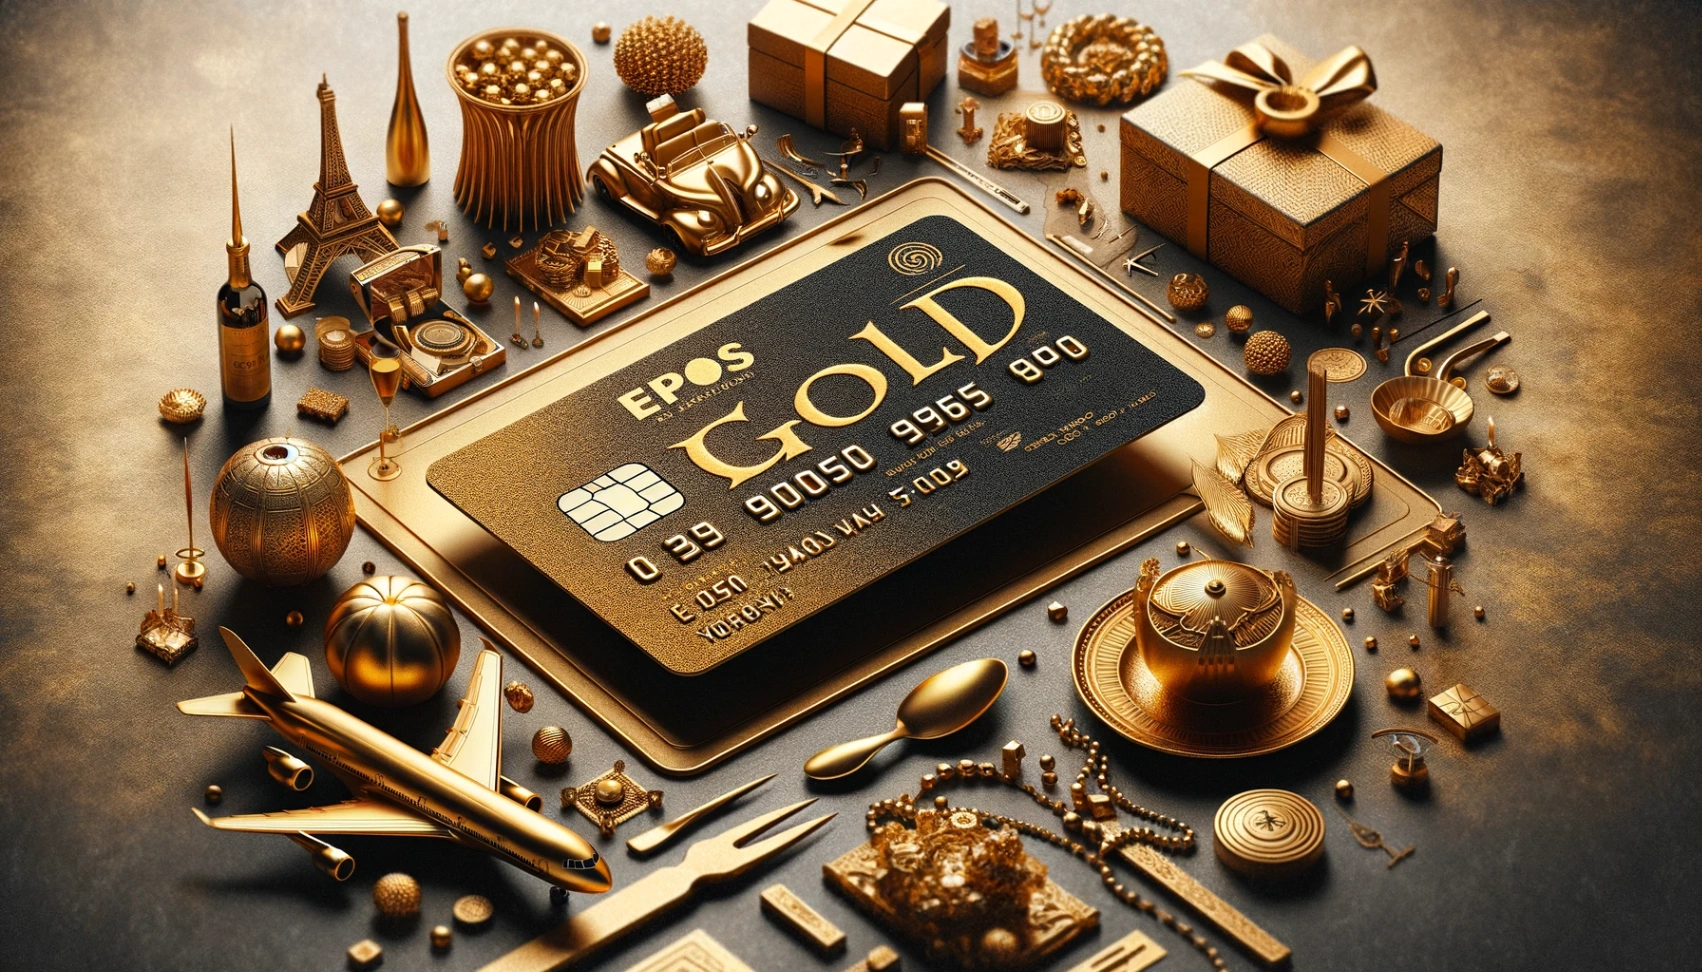 Epos Gold Credit Card: Learn How to Order and Discover the Benefits